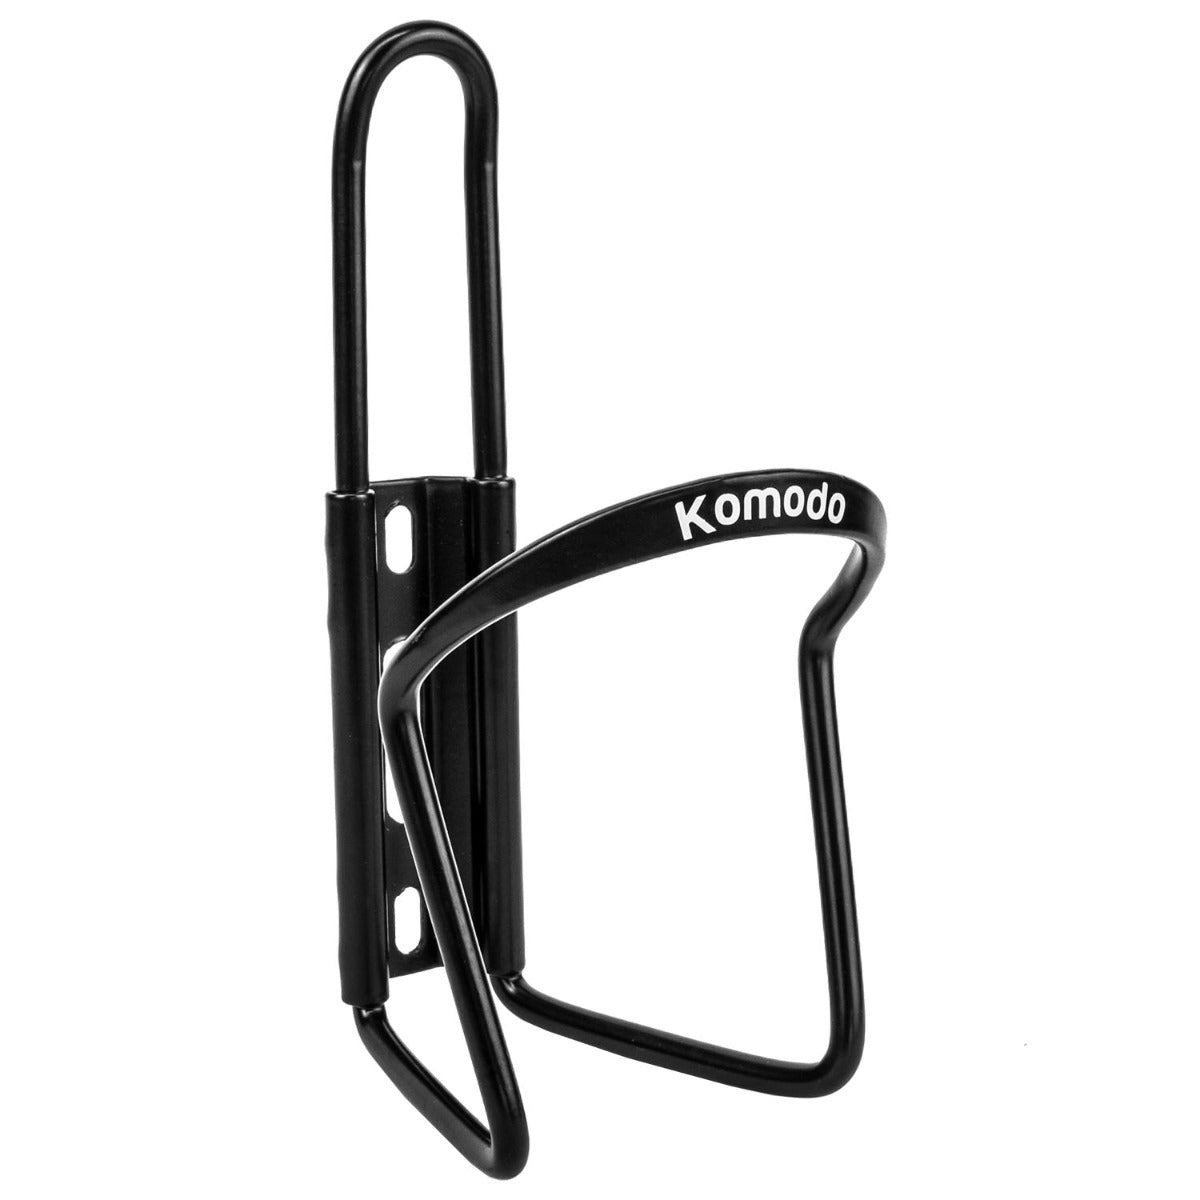 Bicycle Bottle Cage - Black